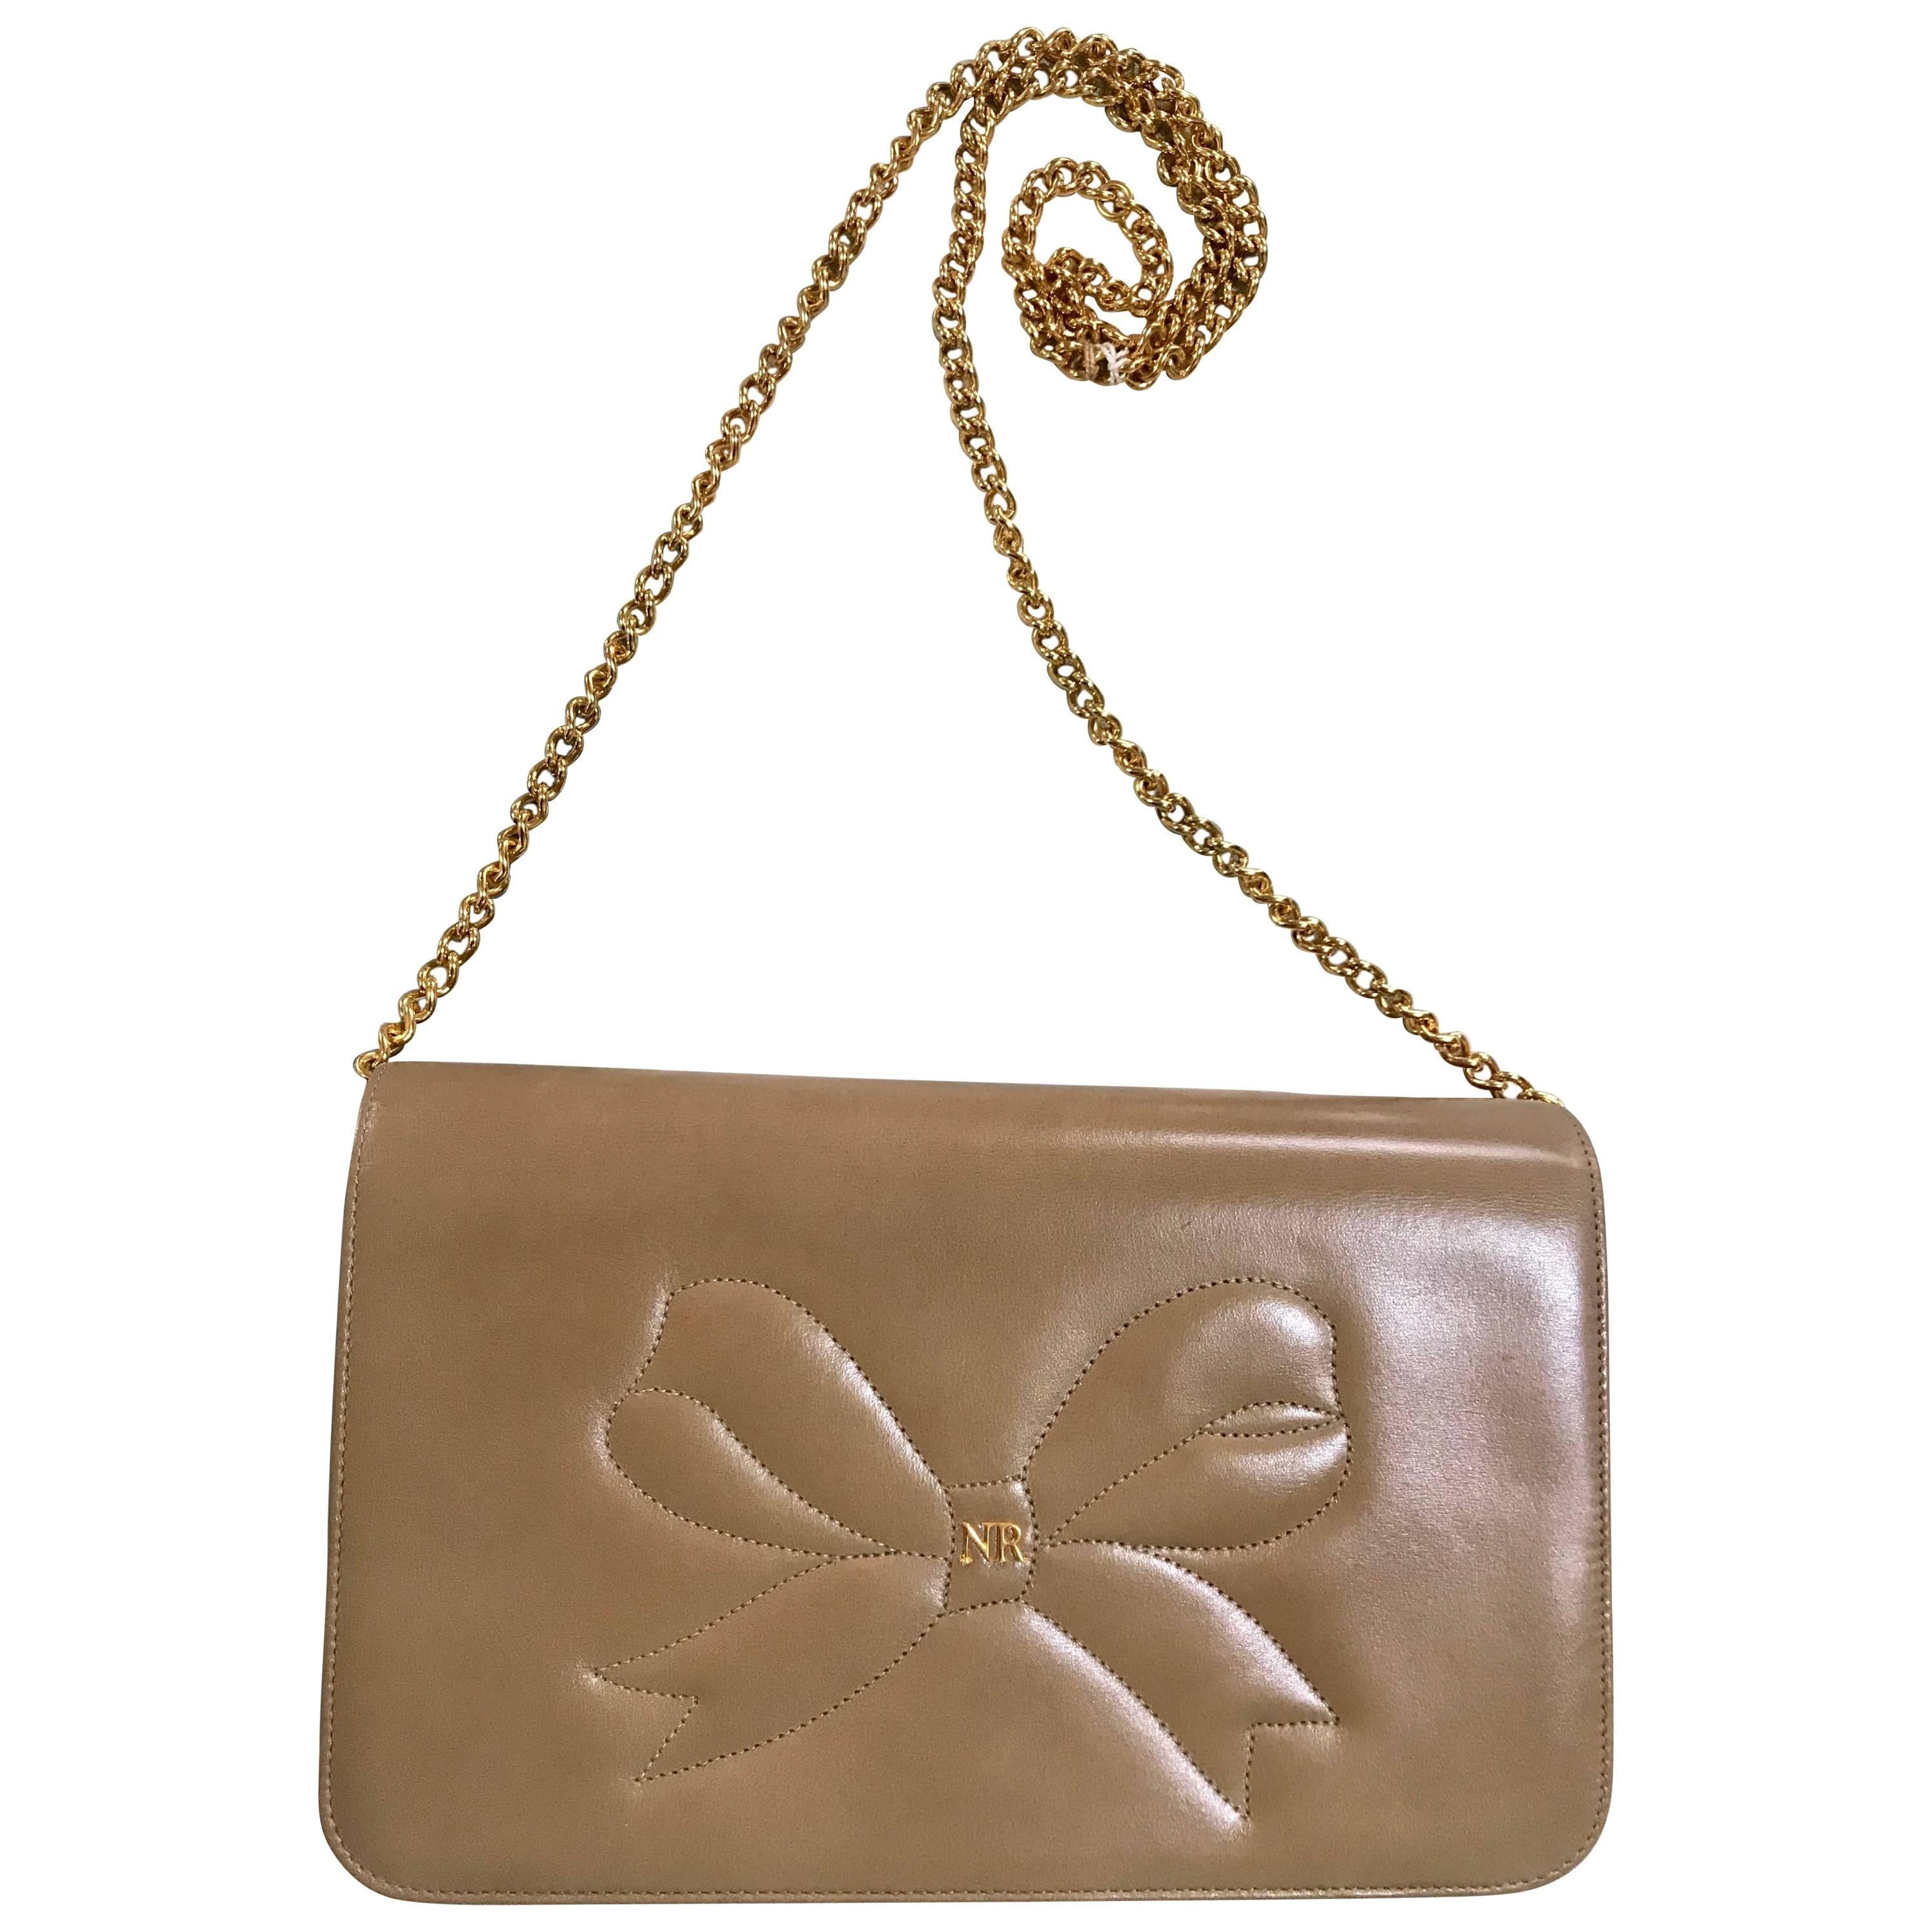 NEW with tag, MINT. Vintage Nina Ricci beige clutch shoulder bag with bow stitch For Sale